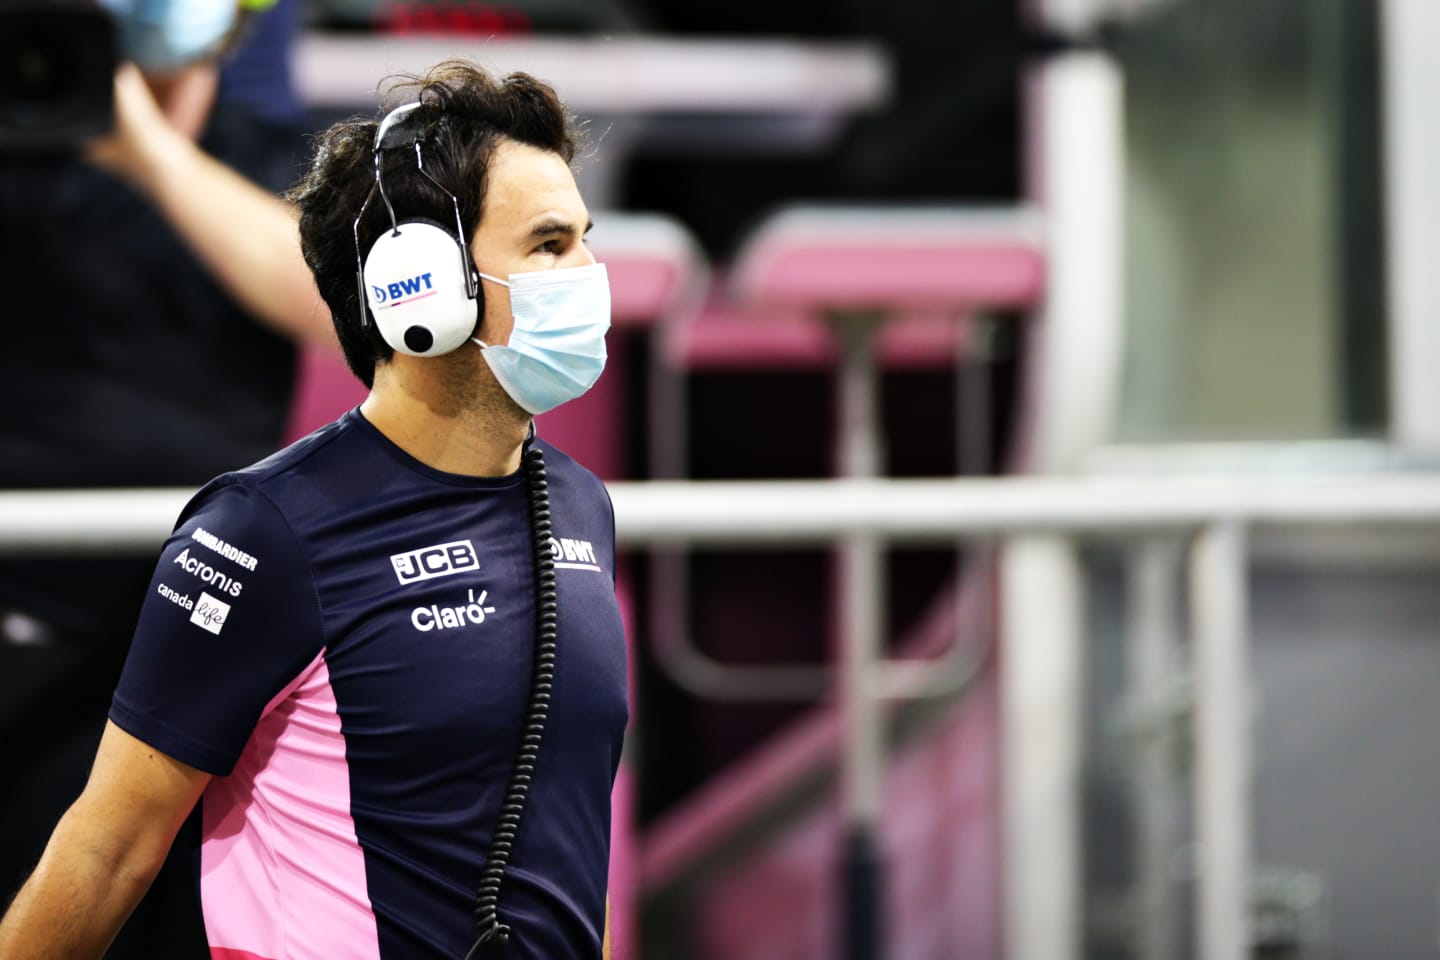 ABU DHABI, UNITED ARAB EMIRATES - DECEMBER 13: Sergio Perez of Mexico and Racing Point looks on from the pitlane after retiring during the F1 Grand Prix of Abu Dhabi at Yas Marina Circuit on December 13, 2020 in Abu Dhabi, United Arab Emirates. (Photo by Peter Fox/Getty Images)